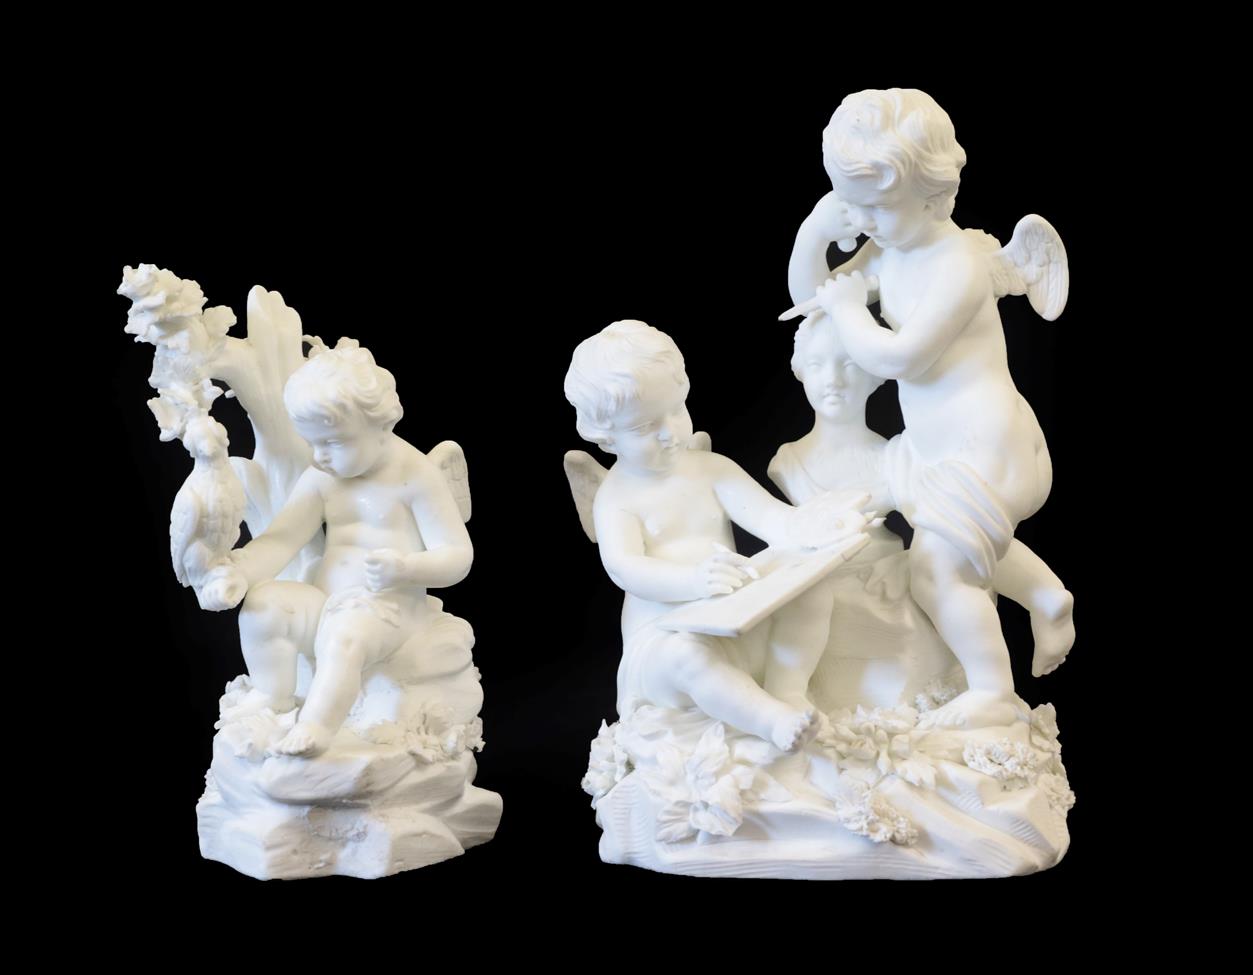 Lot 36 - A Derby Bisque Porcelain Figure Group Representing The Arts, circa 1780, modelled as two putti, one